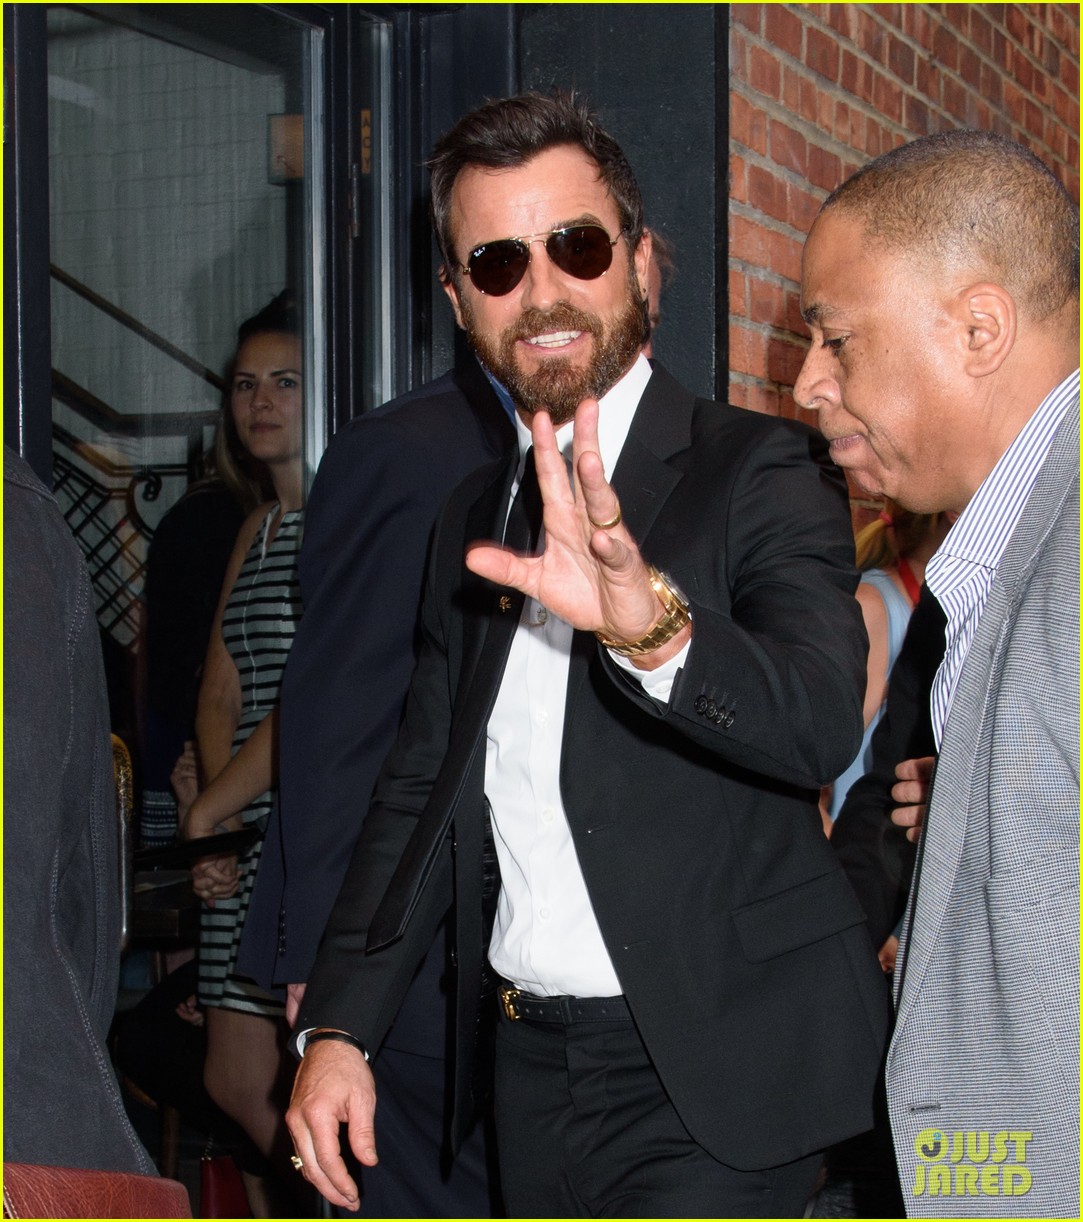 justin theroux attends the series finale screening of the leftovers in nyc013908066